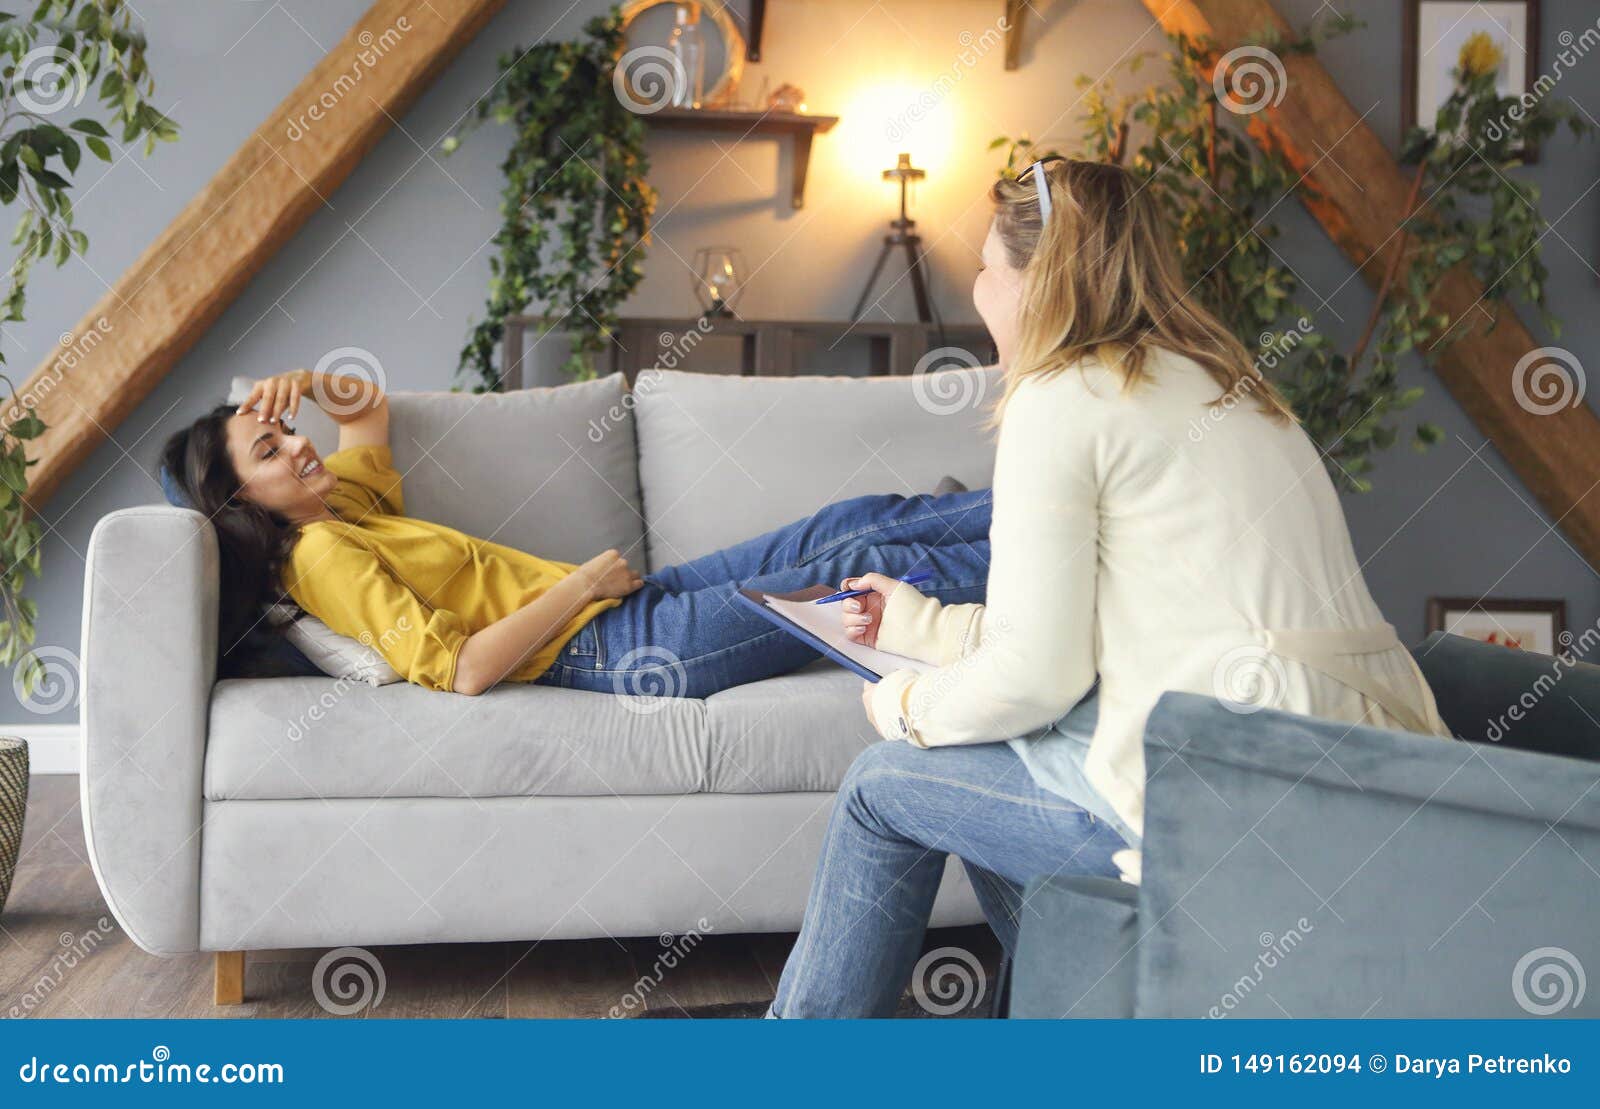 psychologist having session with her female patient